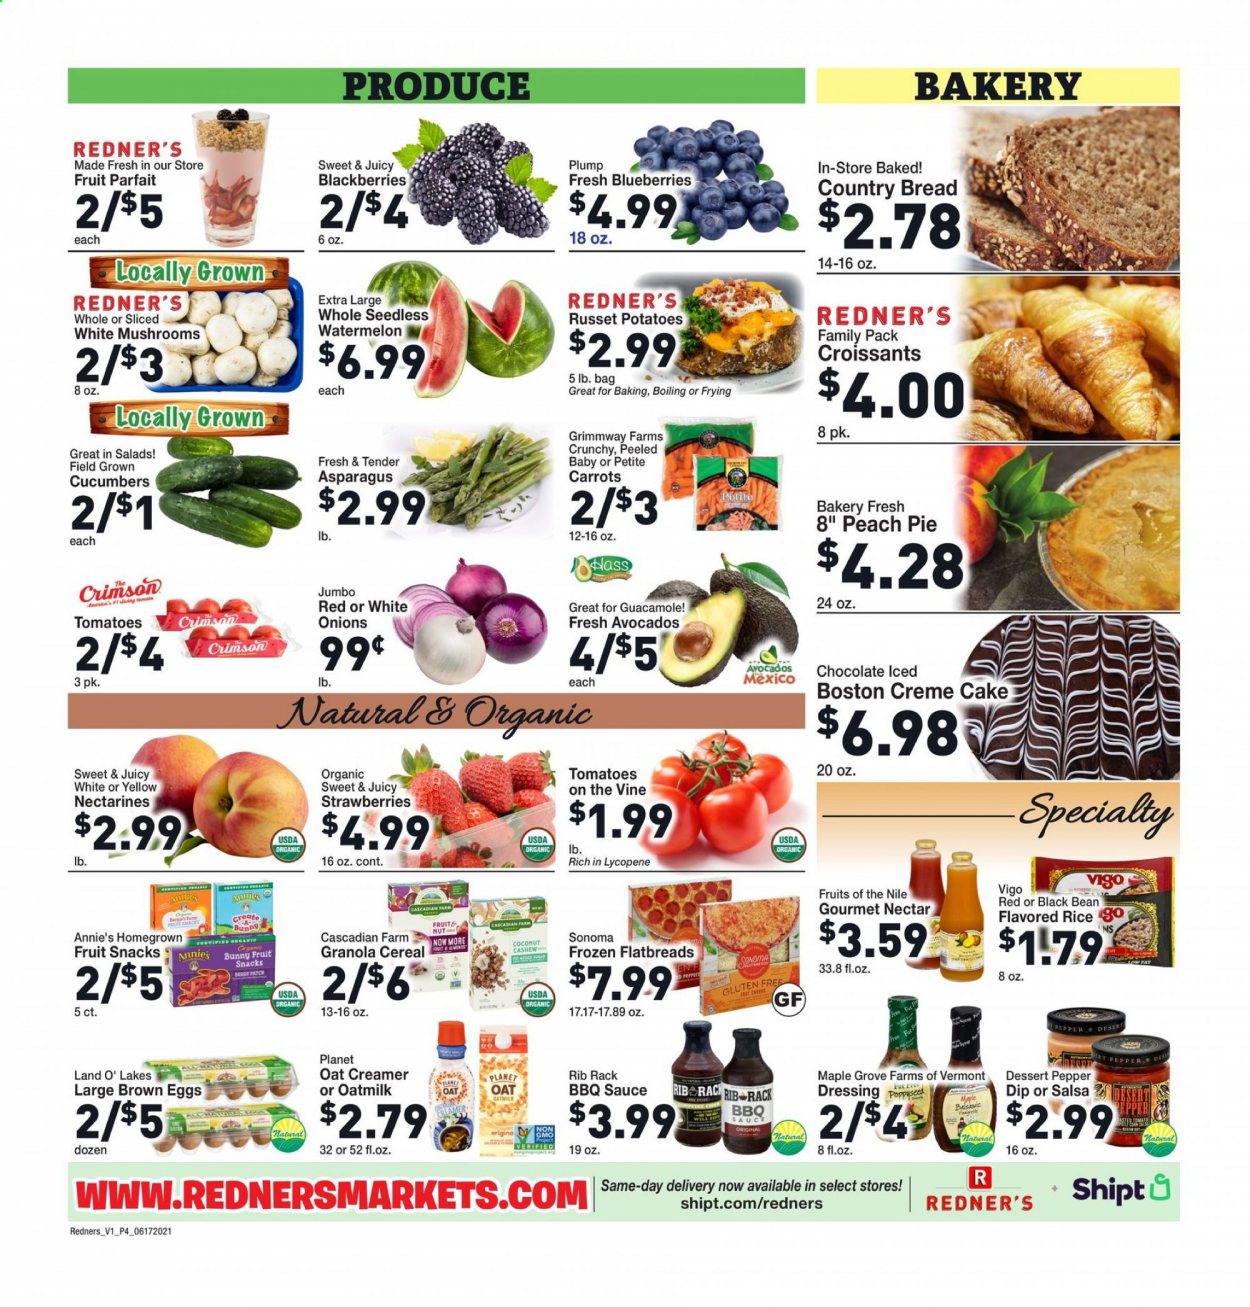 thumbnail - Redner's Markets Flyer - 06/17/2021 - 06/23/2021 - Sales products - bread, cake, pie, croissant, cream pie, asparagus, carrots, cucumber, russet potatoes, tomatoes, potatoes, onion, blackberries, blueberries, strawberries, watermelon, coconut, sauce, Annie's, guacamole, oat milk, eggs, creamer, dip, chocolate, fruit snack, oats, cereals, granola, rice, pepper, BBQ sauce, dressing, salsa, almonds, nectarines. Page 6.